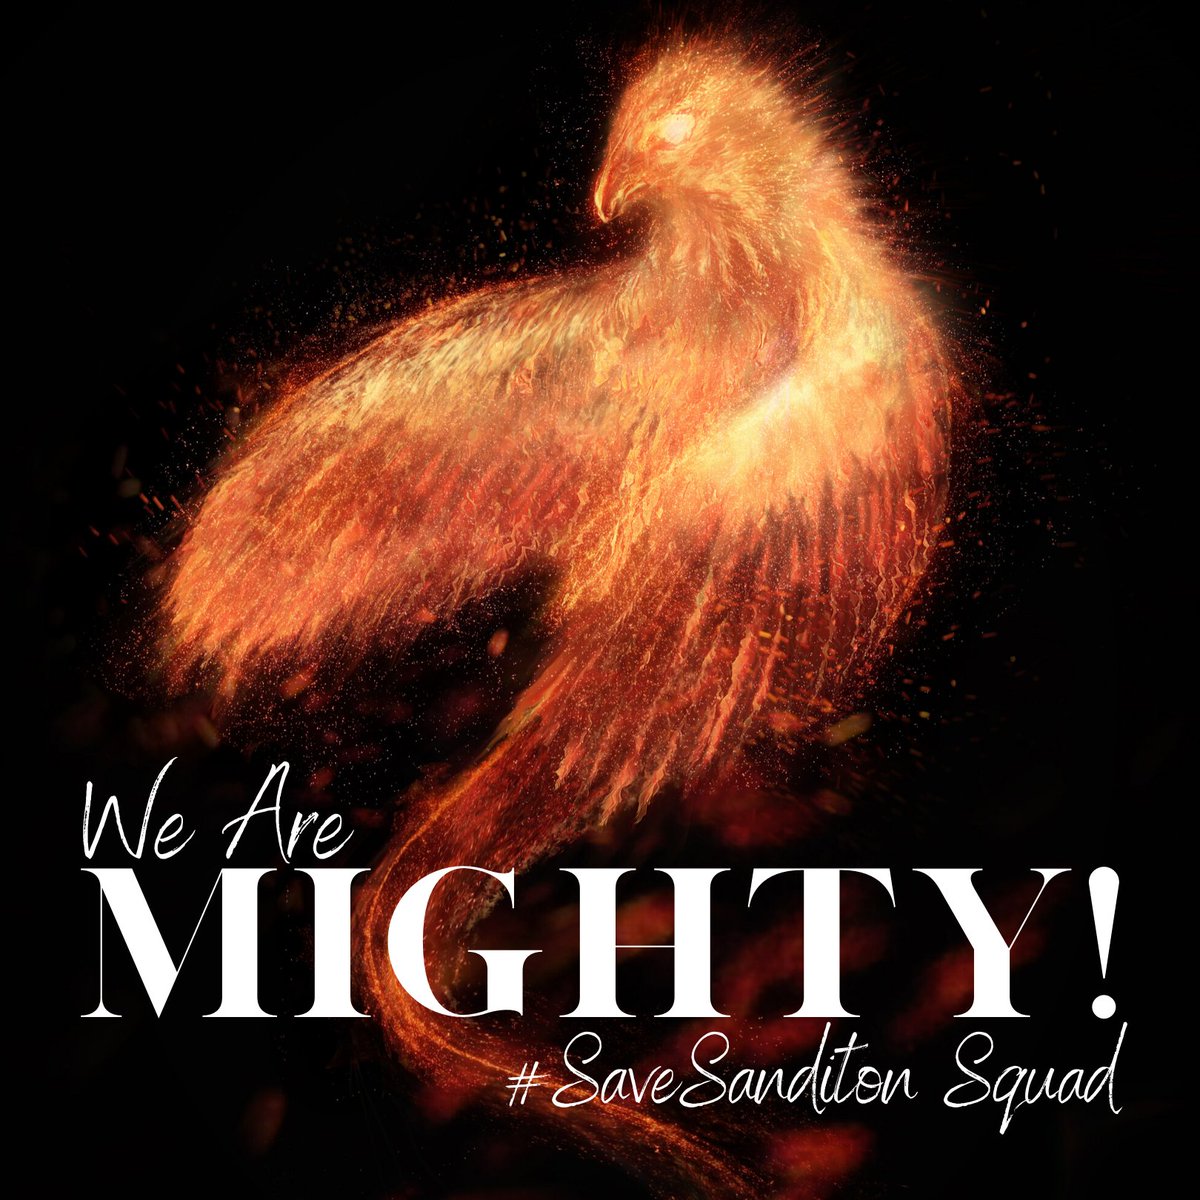 We WILL rise from the Ashes. We are like a Phoenix. Don't EVER count us out! Join us! @PBS  @masterpiecepbs  @PrimeVideo  @primevideouk  @Sanditon  @wgbh  #Sanditon  #SaveSanditon  #SanditonPBS